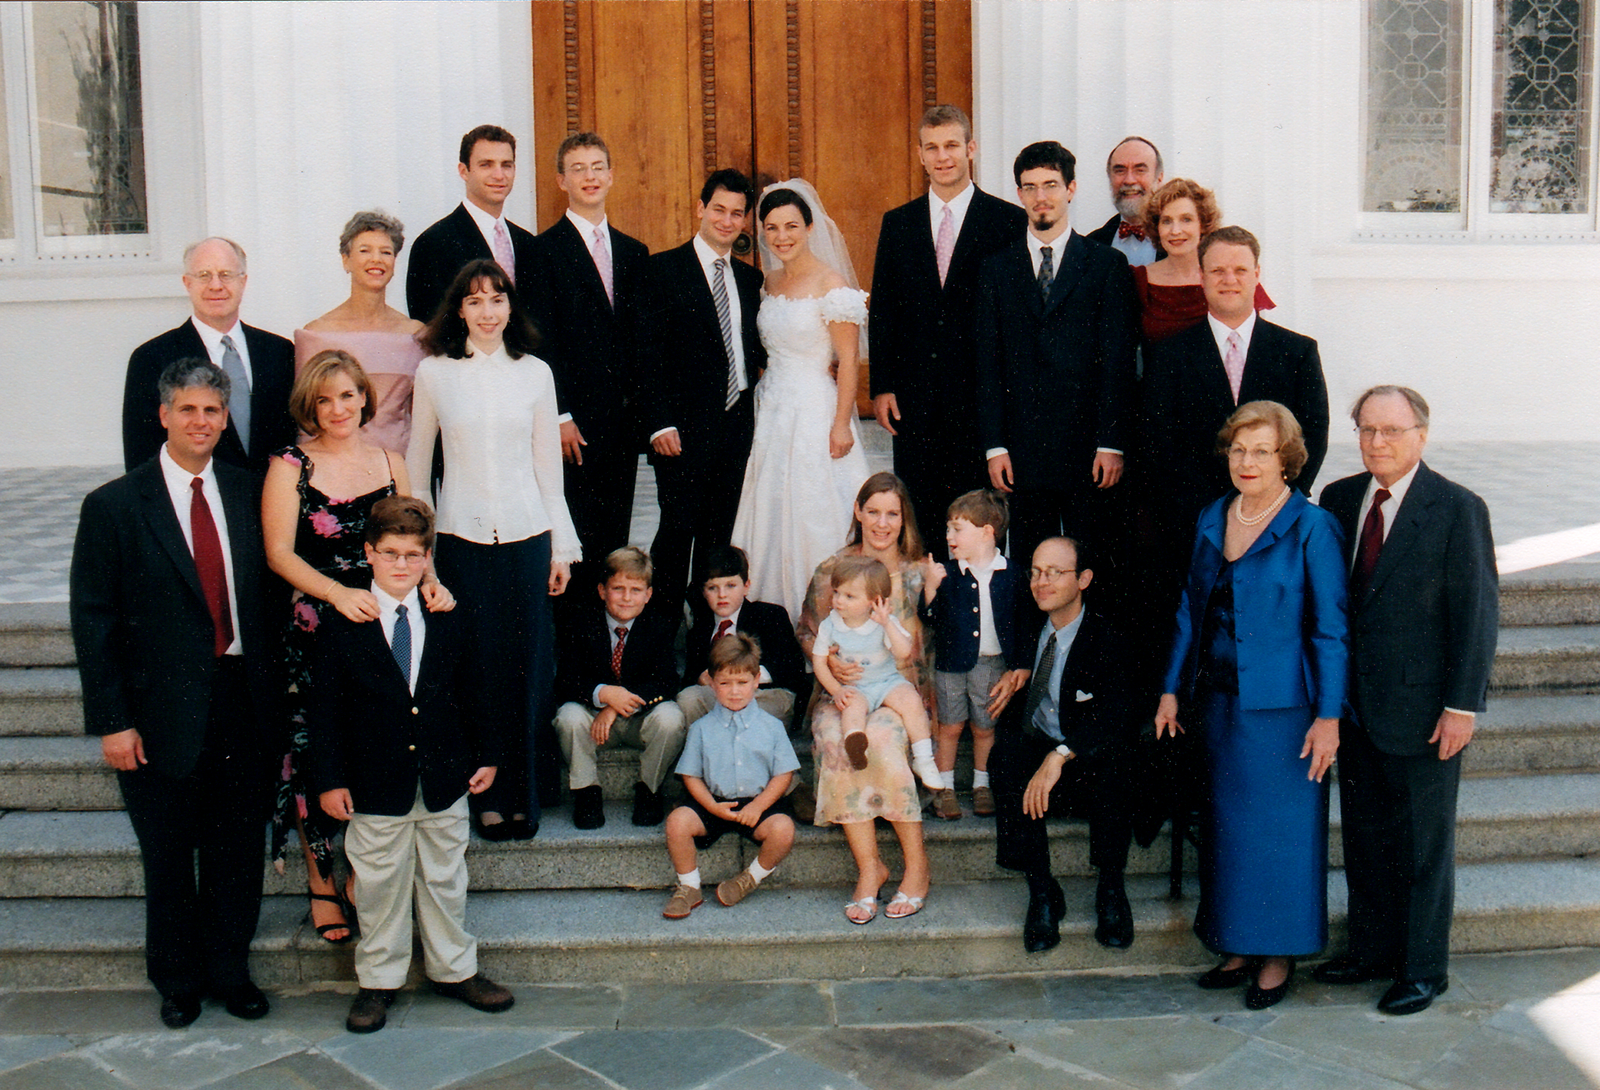 Rabbi Nussbaum and family at her wedding, 2003.